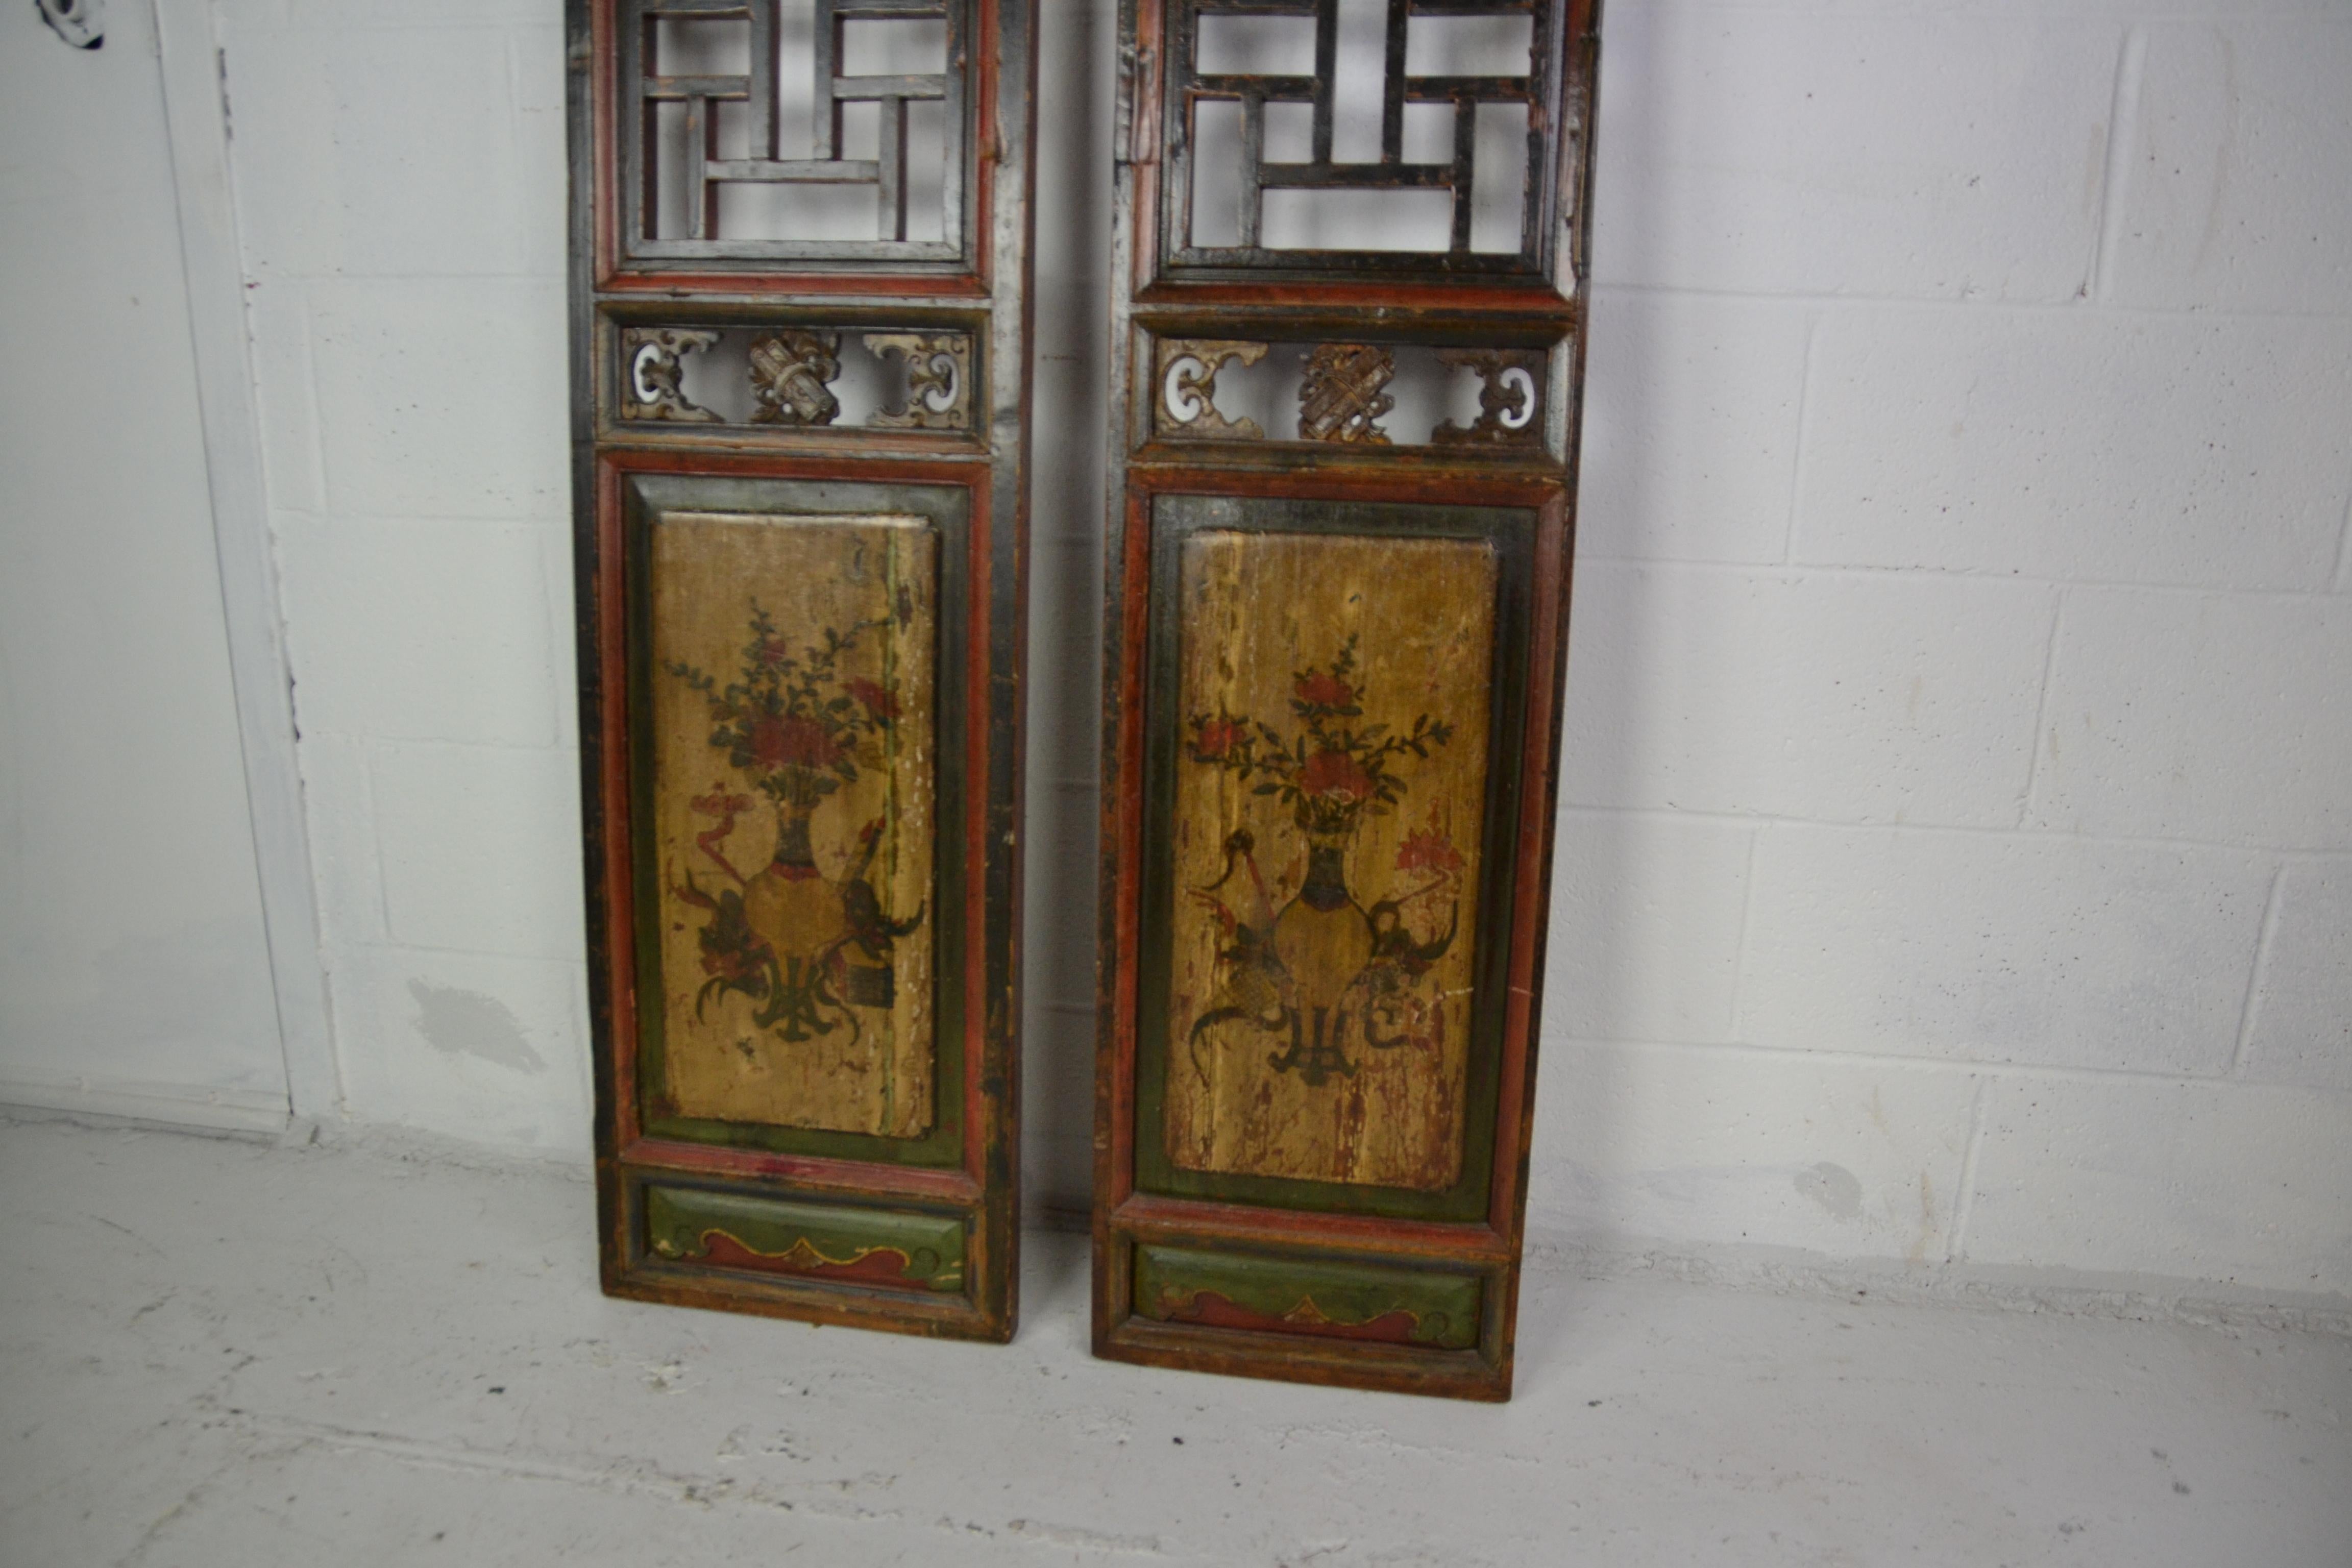 A pair of late 19th century Chinese panels in a red and black ground. Panels hand painted design over faded gold.